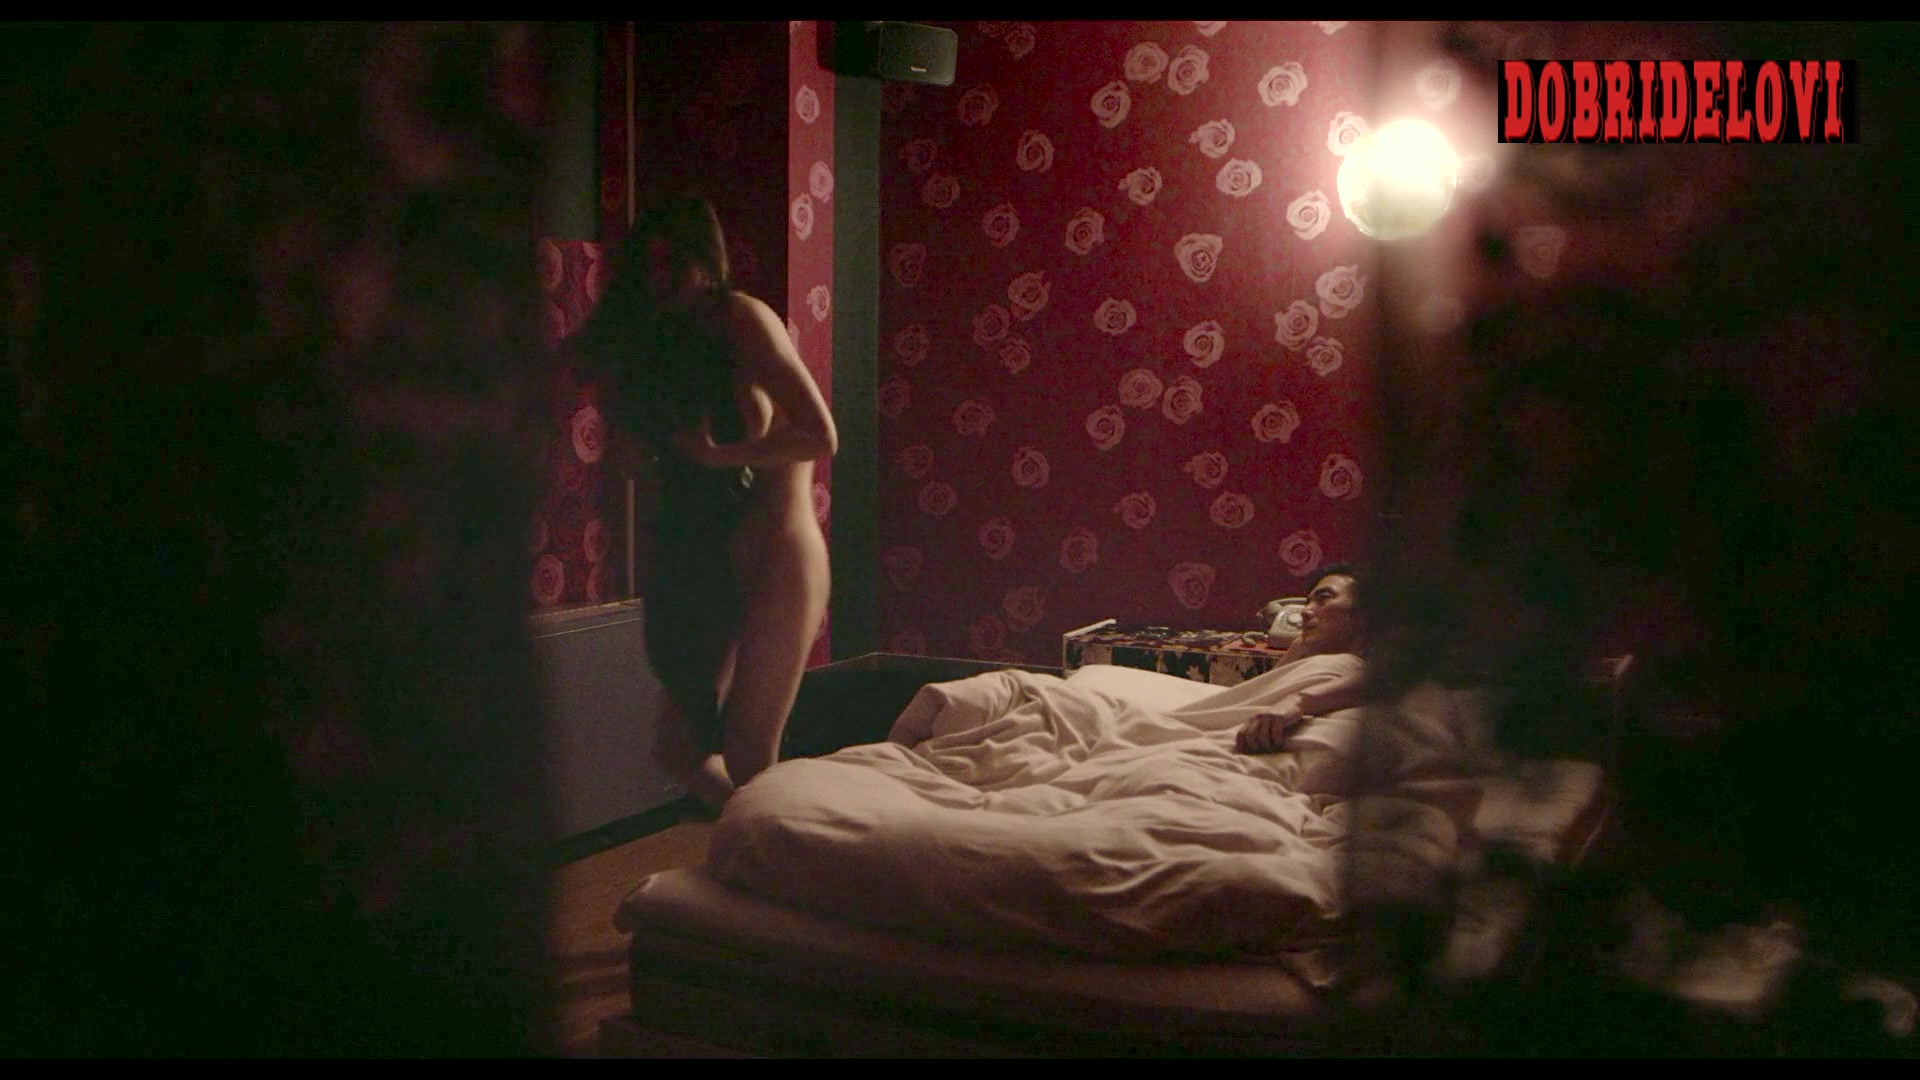 Alexandra Daddario getting up from bed scene from Lost Girls and Love Hotels